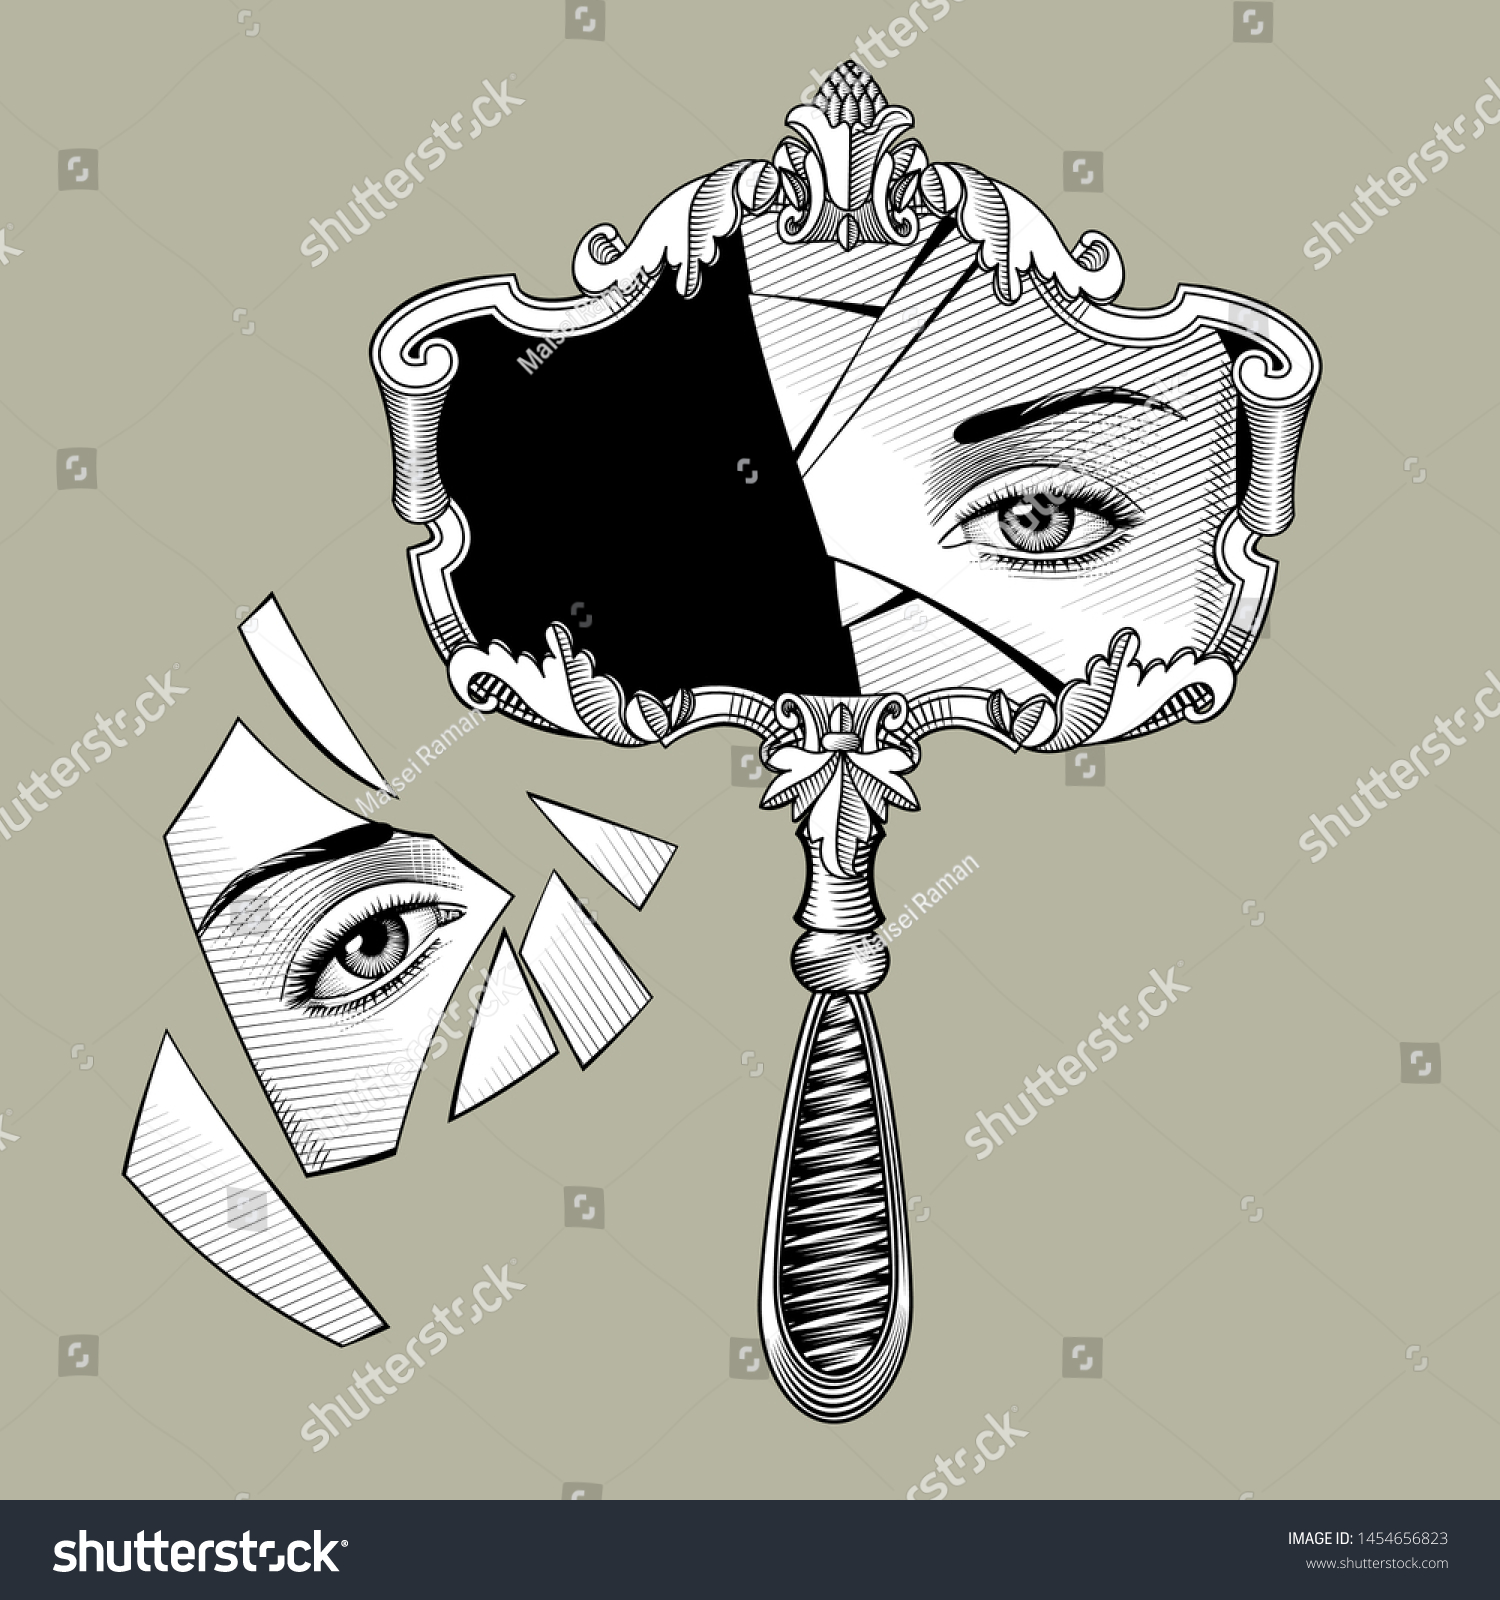 SVG of Broken retro mirror with a decorative frame and handle and eye reflection in the shards. Vintage engraving stylized drawing. Vector Illustration svg